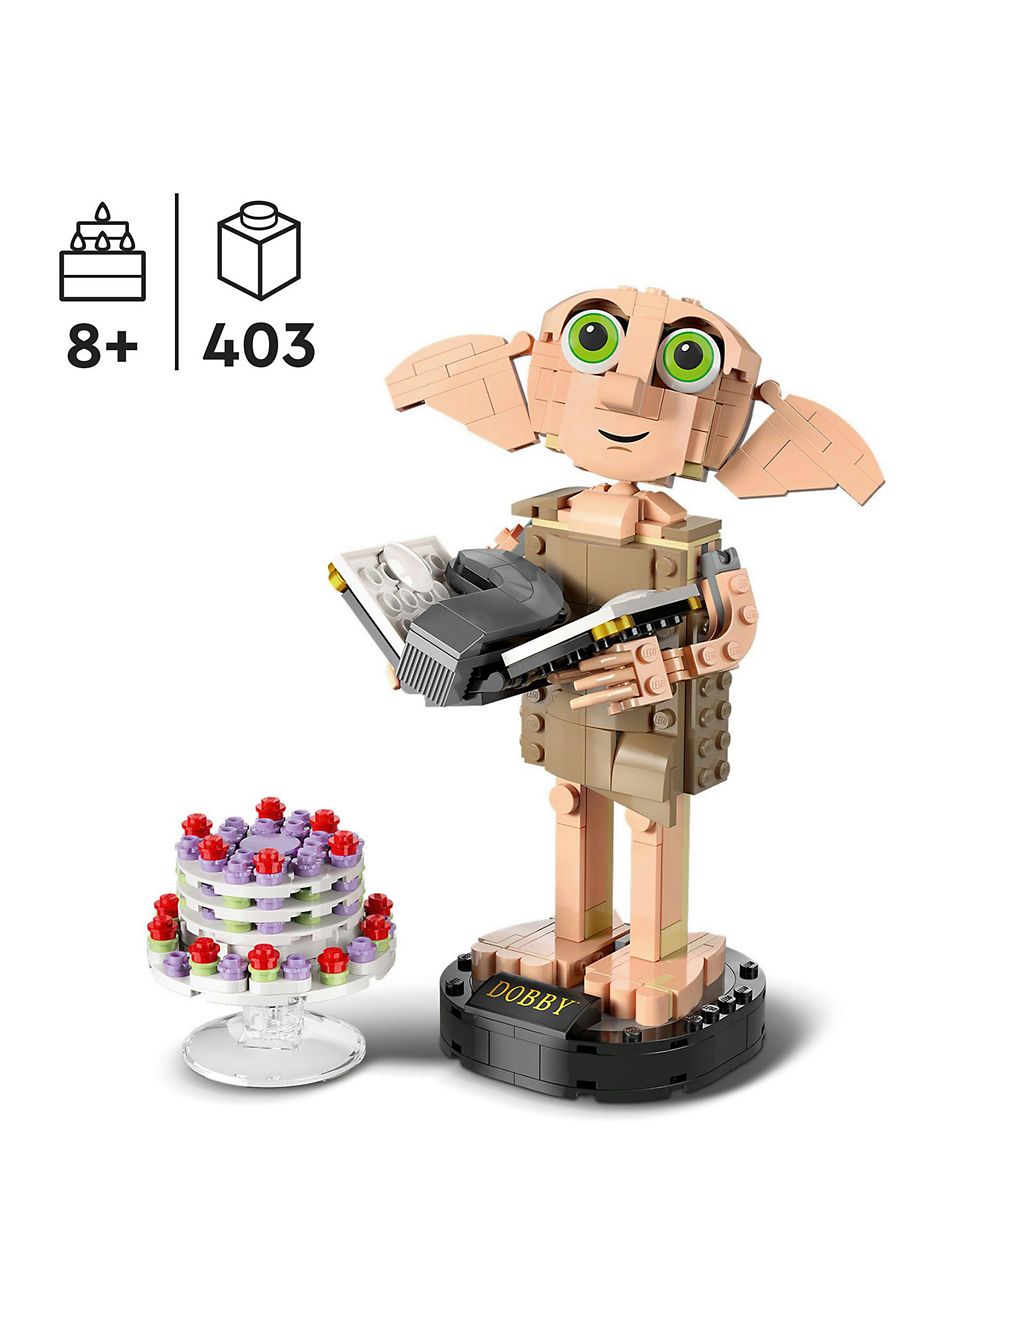 LEGO Harry Potter Dobby the House-Elf Figure 76421 (8+ Yrs) 1 of 6